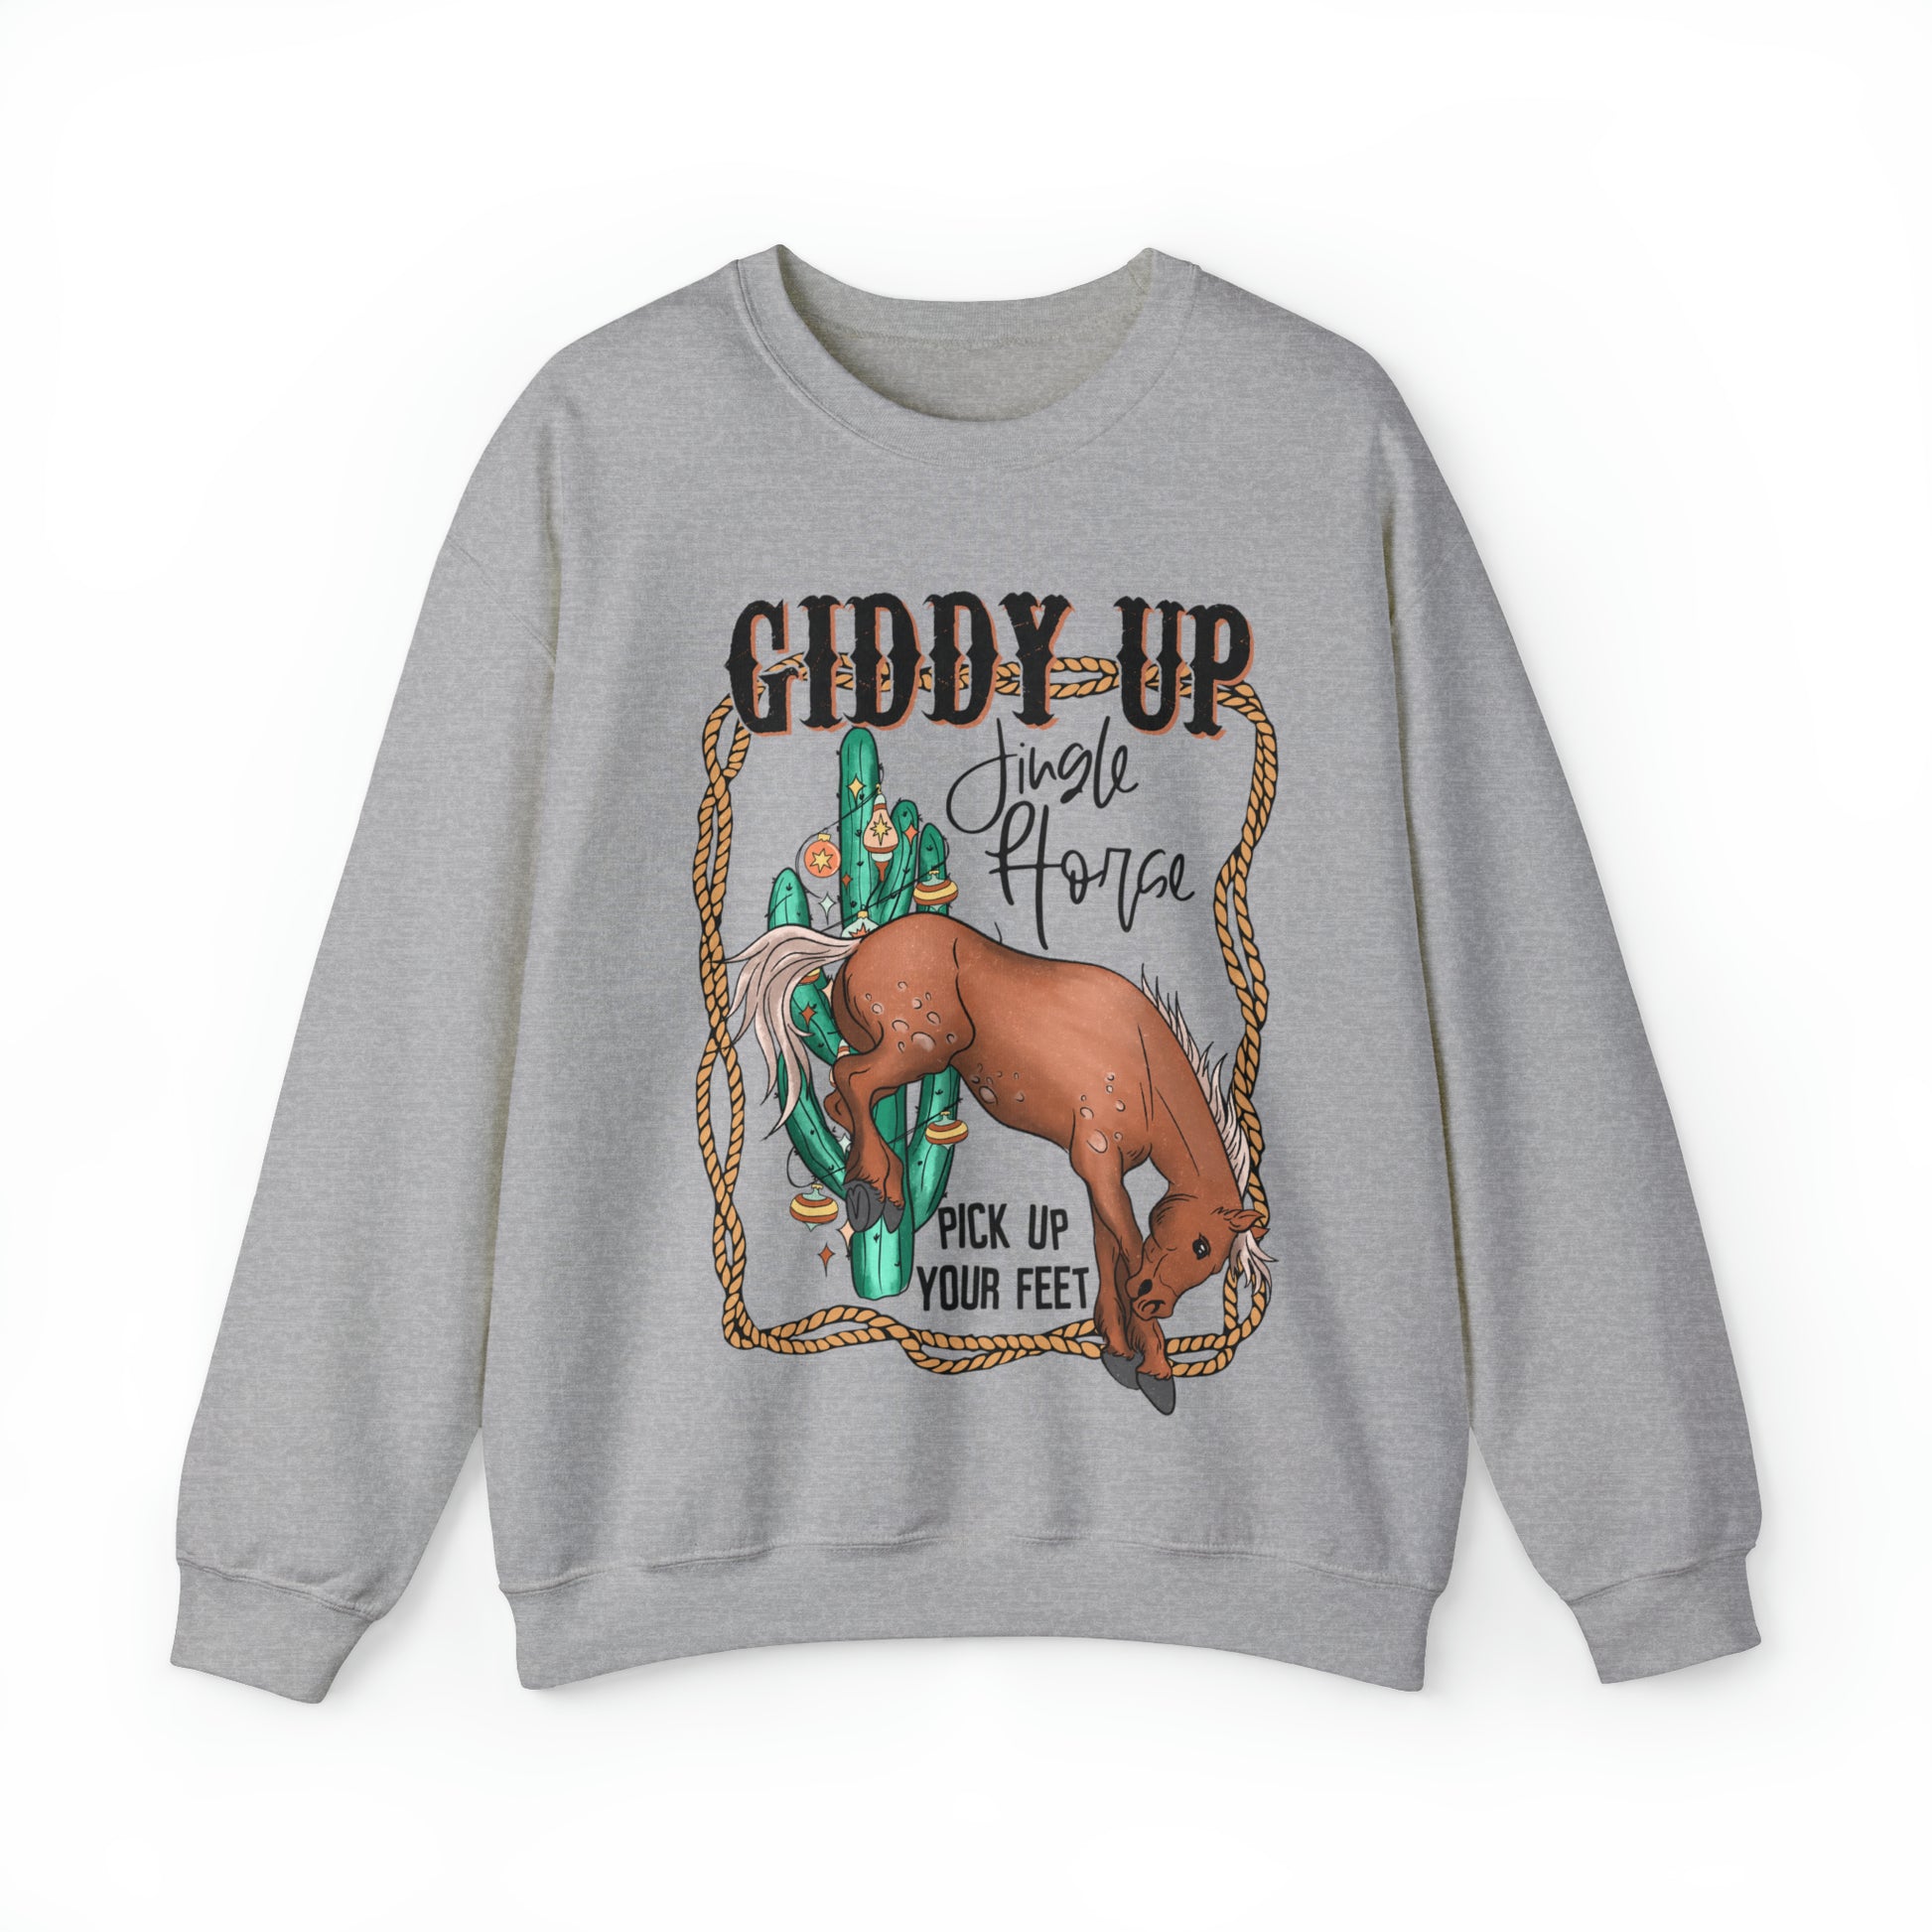 Giddy UP Western Themed Christmas Sweater